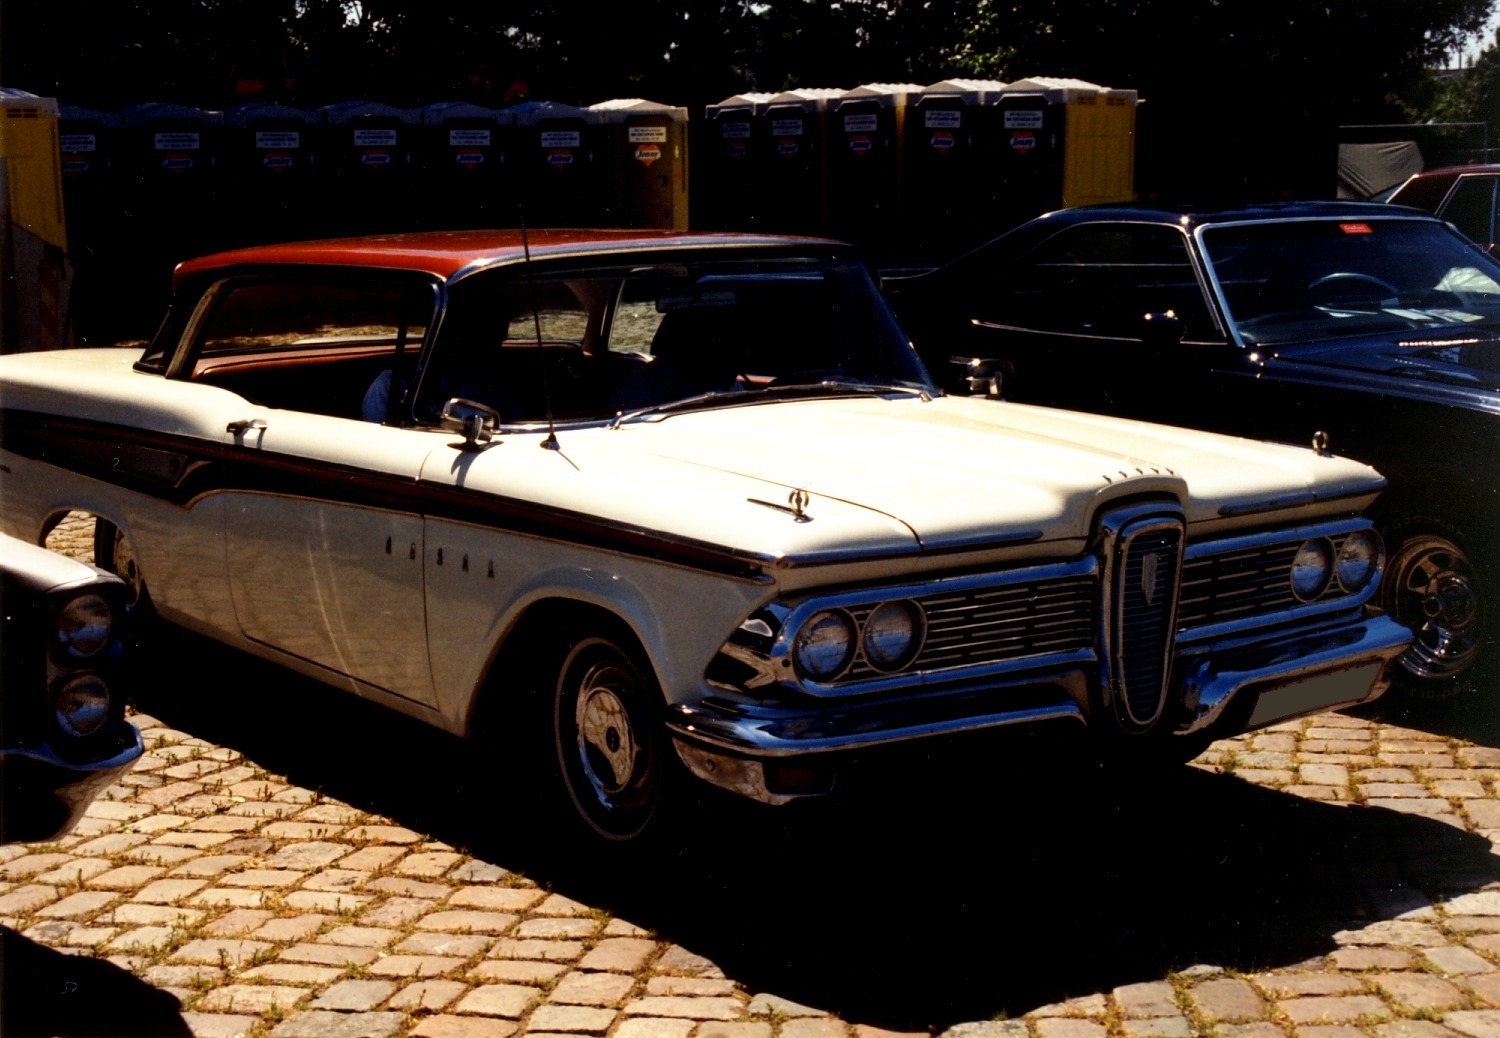 Edsel Ciation Coupe Photo Gallery: Photo #09 out of 12, Image Size ...